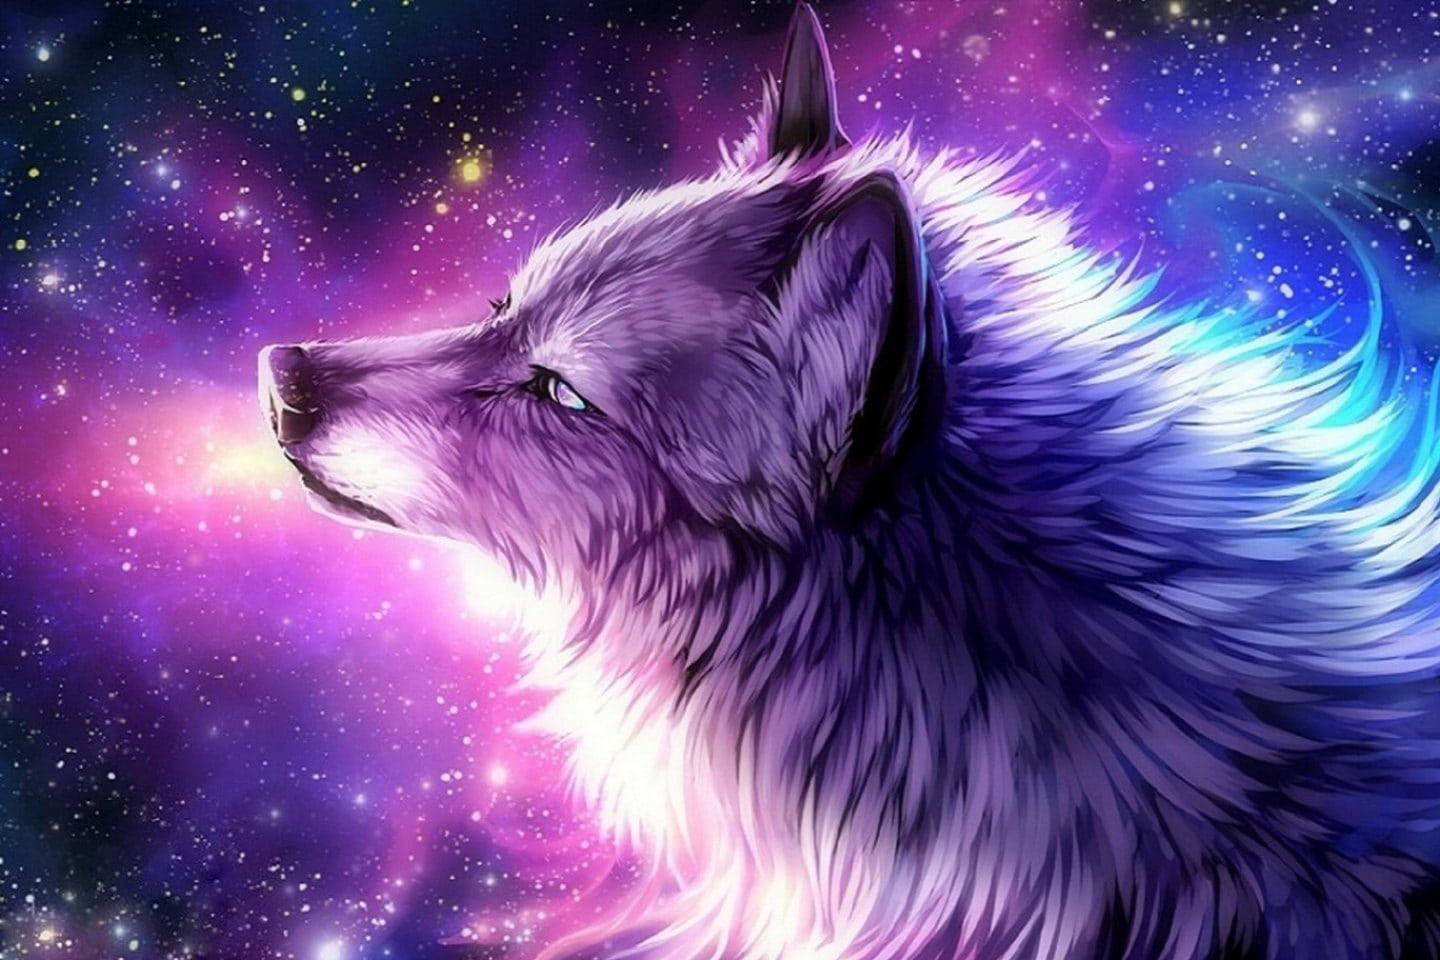 Free Anime Wolf Wallpaper Downloads, Anime Wolf Wallpaper for FREE